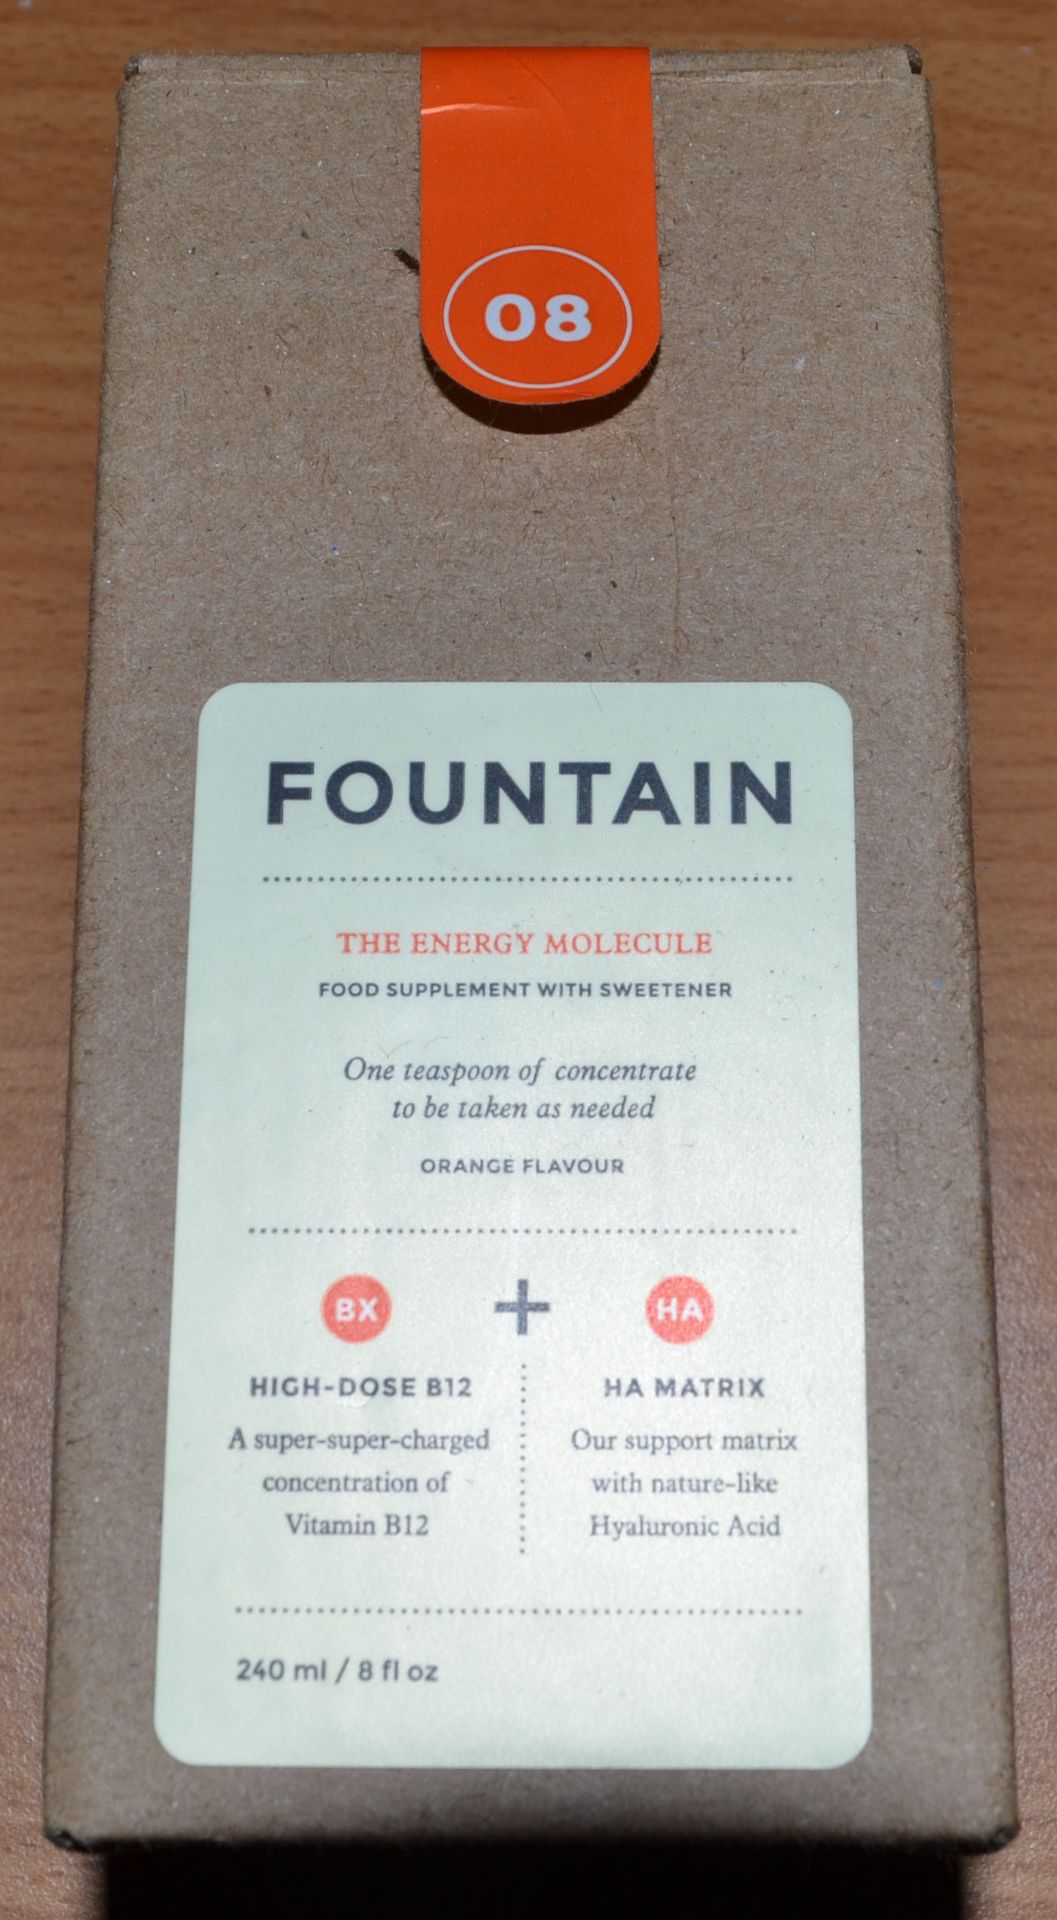 20 x 240ml Bottles of Fountain, The Energy Molecule Supplement - New & Boxed - CL185 - Ref: DRT0643 - Image 2 of 7